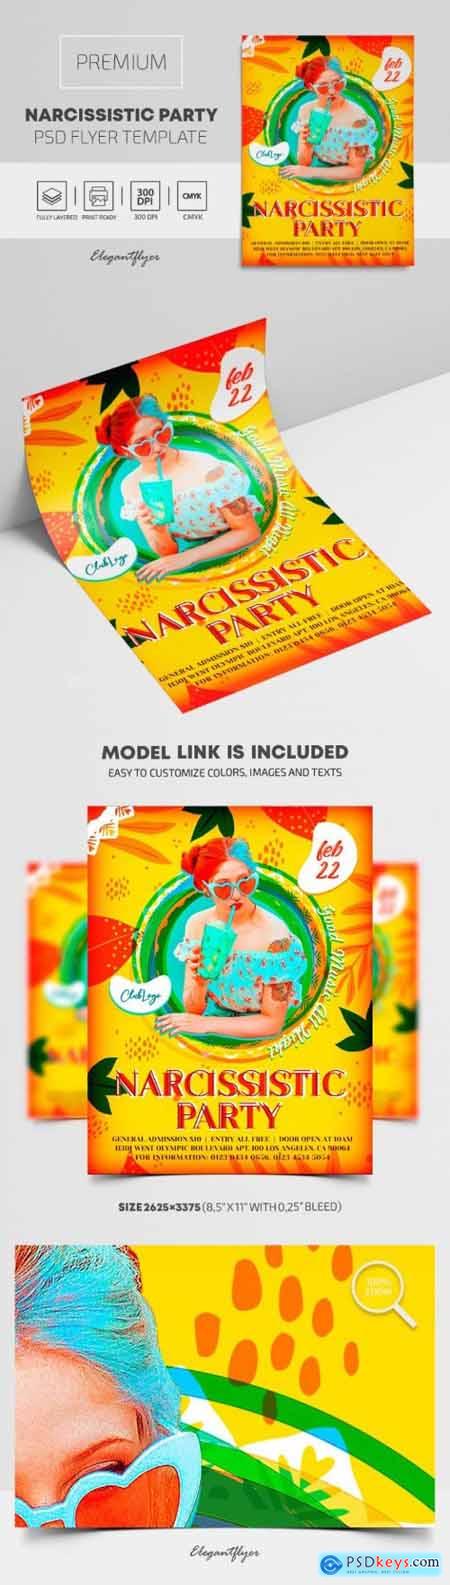 Narcissistic Party  Premium PSD Flyer Template